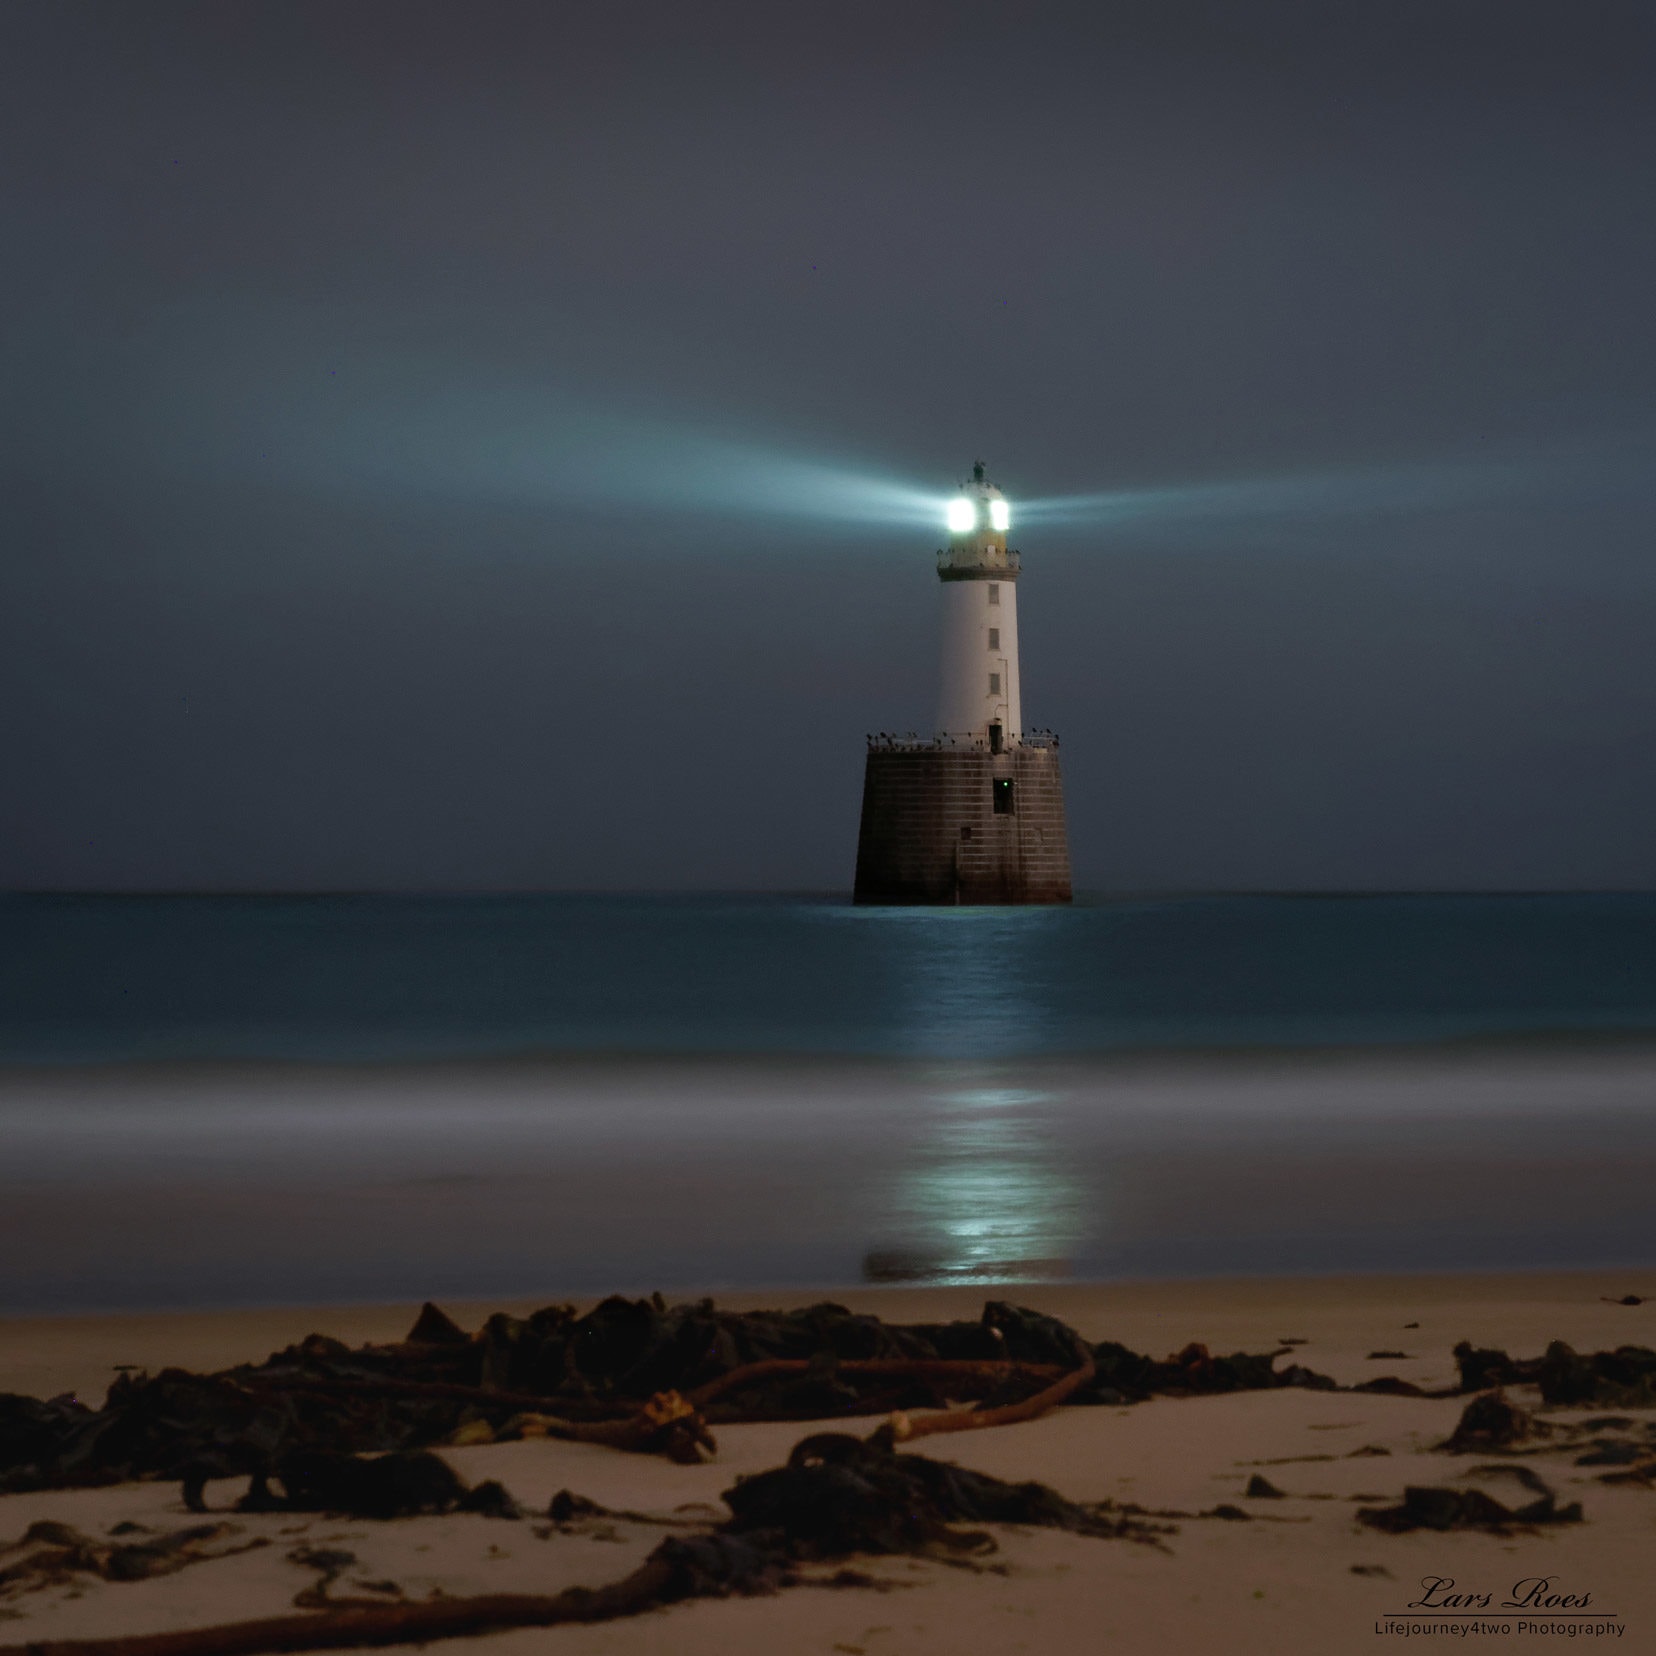 lighthouse seen at night with its light on